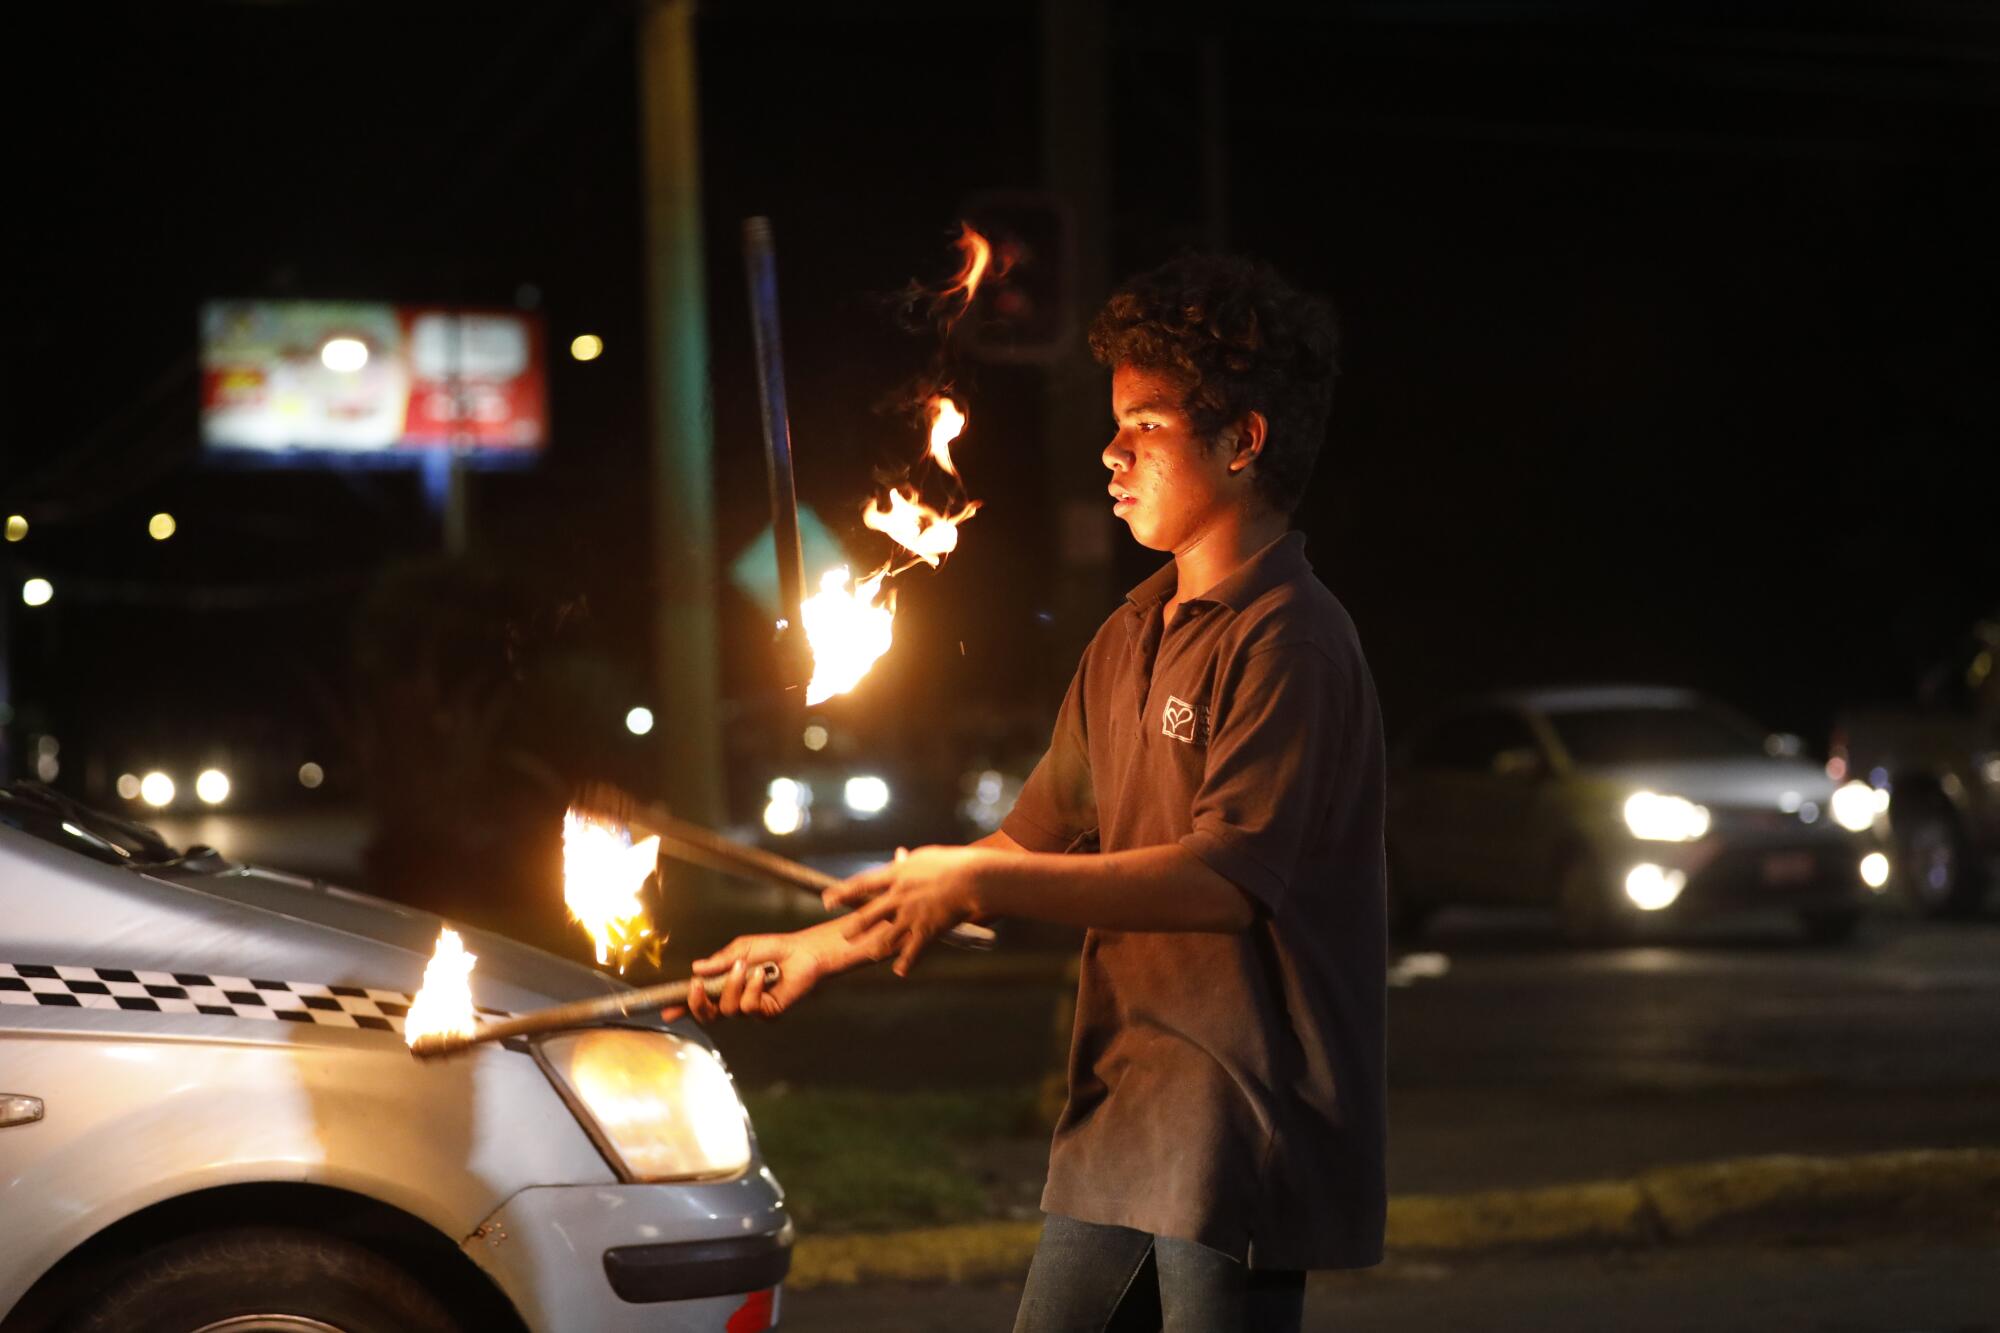 A boy juggles fire sticks in an intersection in Managua, Nicaragua